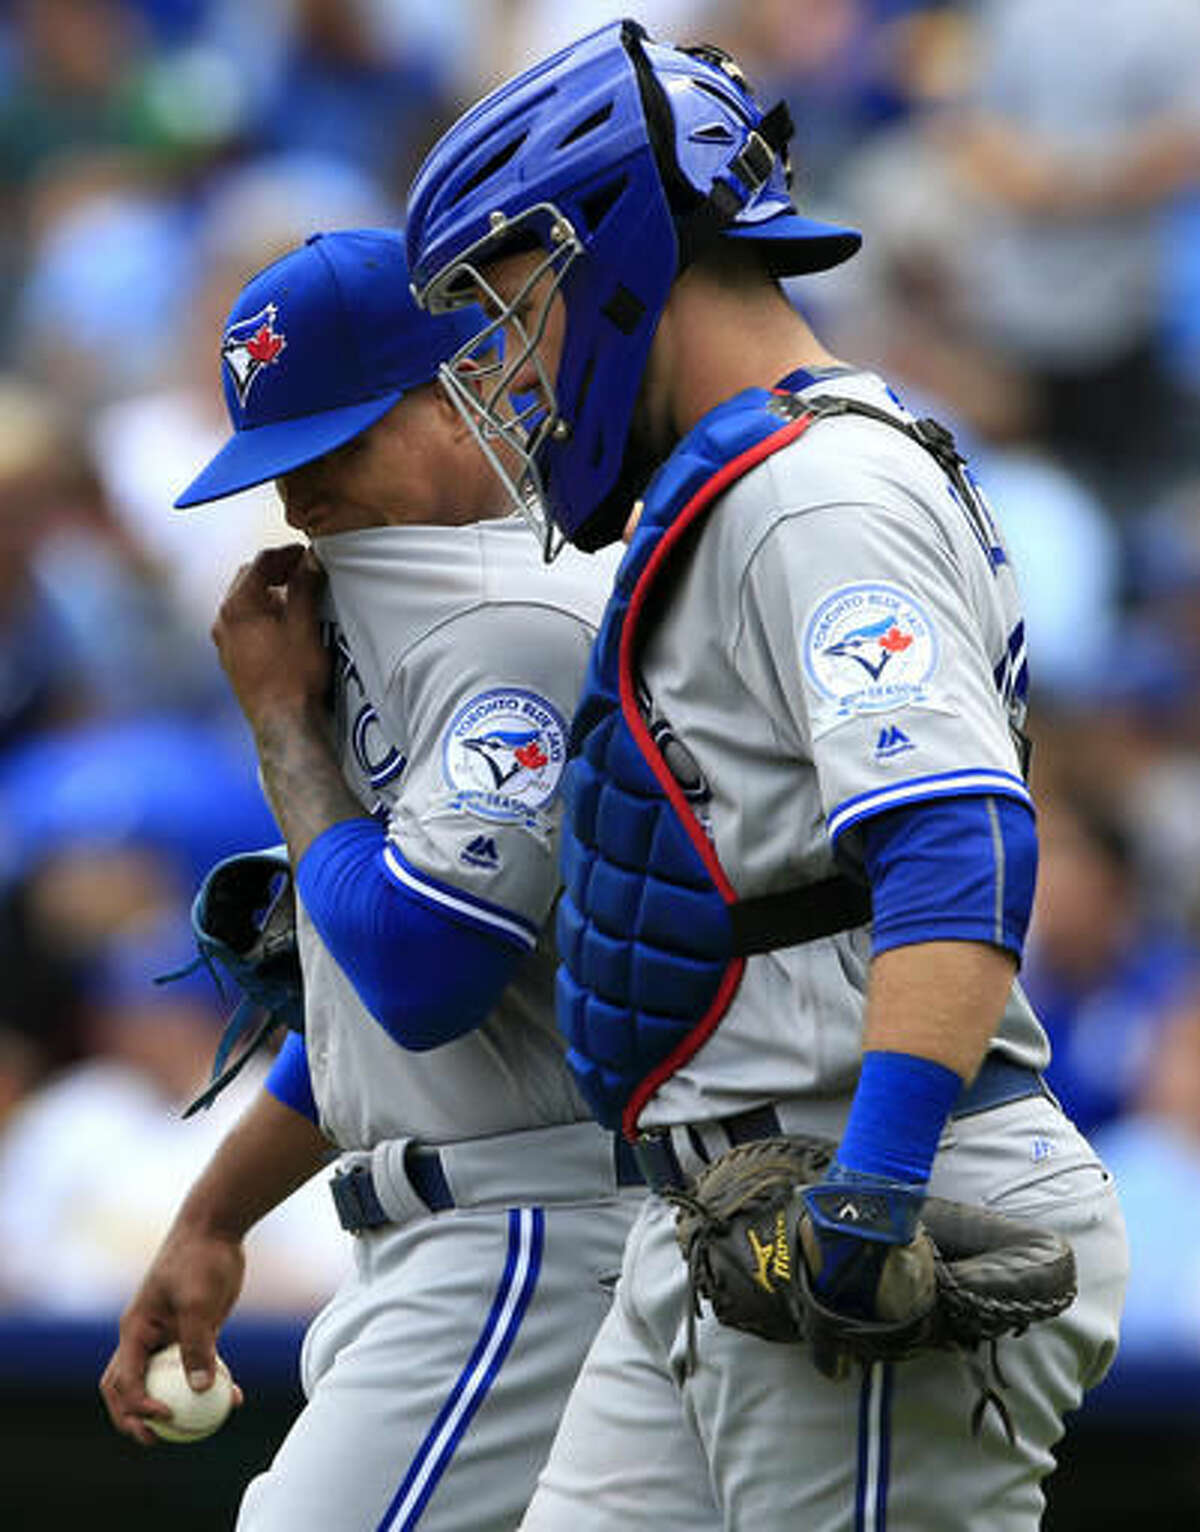 Toronto Blue Jays starting pitcher Marcus Stroman, left, talks with catcher Josh Thole, right, after allowing a run in the second inning of a baseball game against the Kansas City Royals in Kansas City, Mo., Sunday, Aug. 7, 2016. (AP Photo/Orlin Wagner)